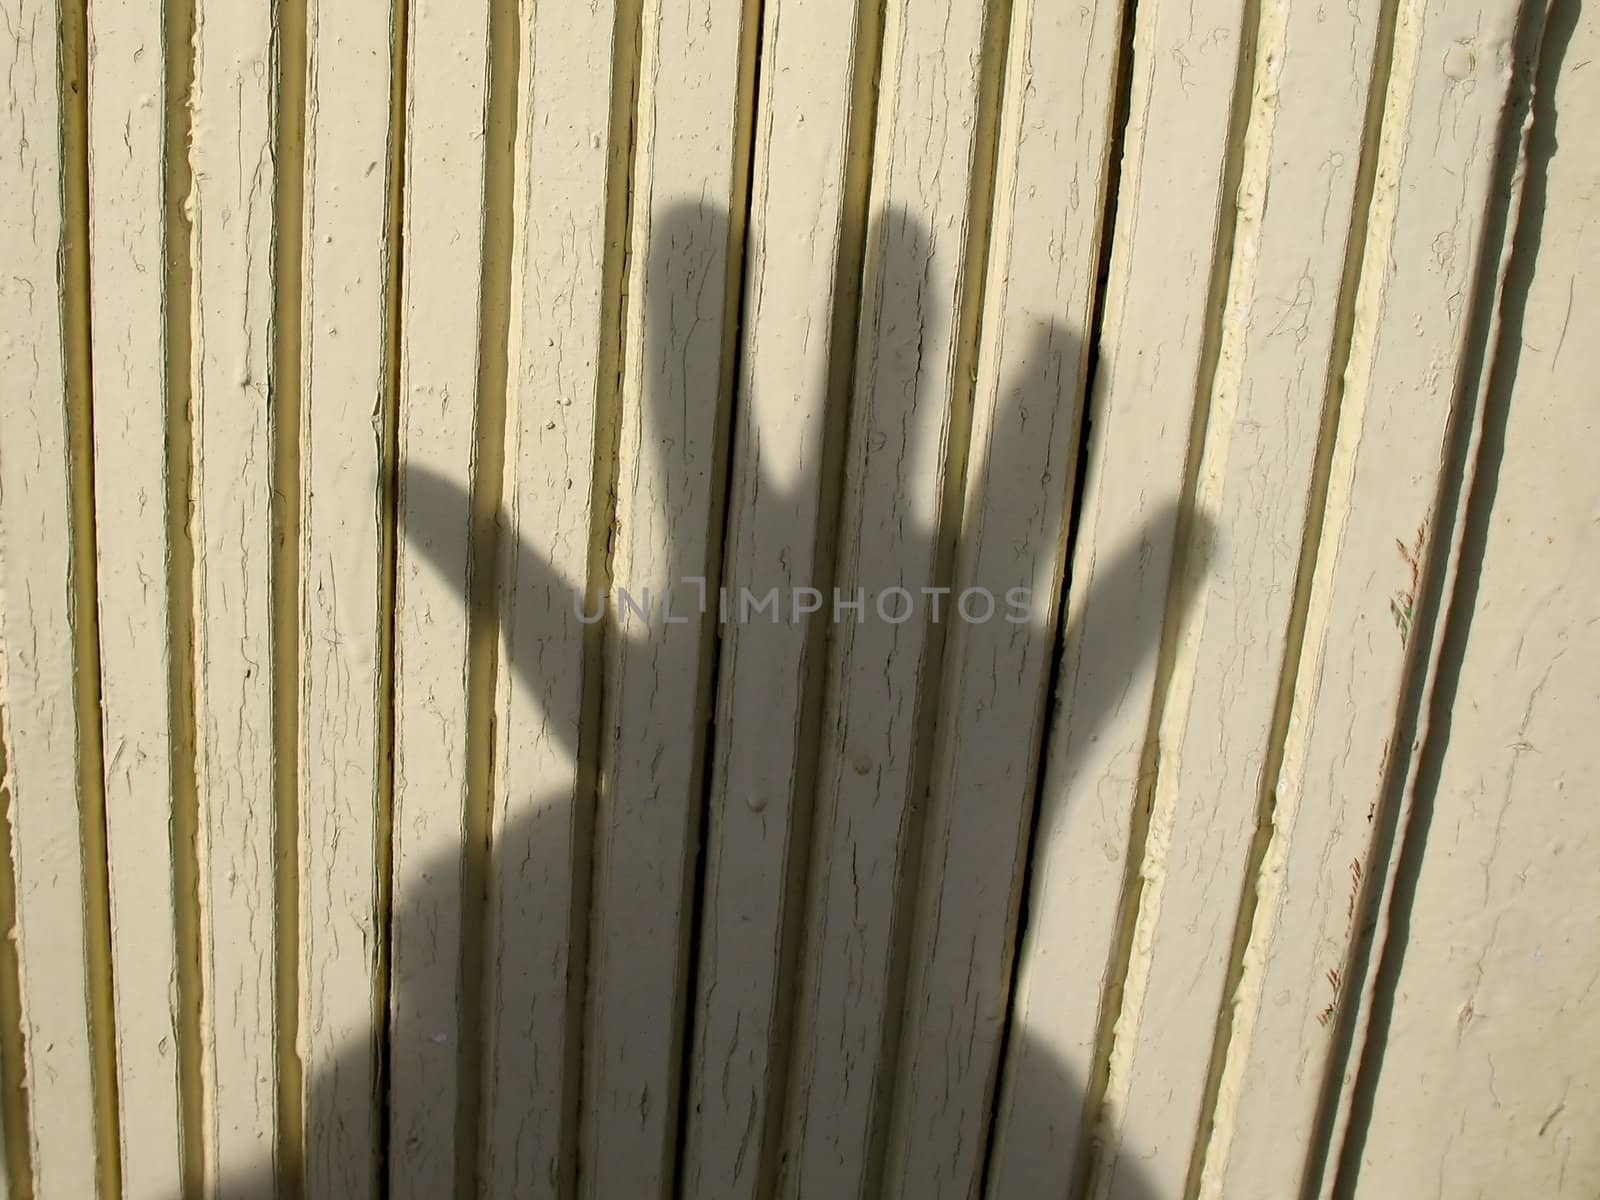 Hand`s shadow on wood wall. by julien